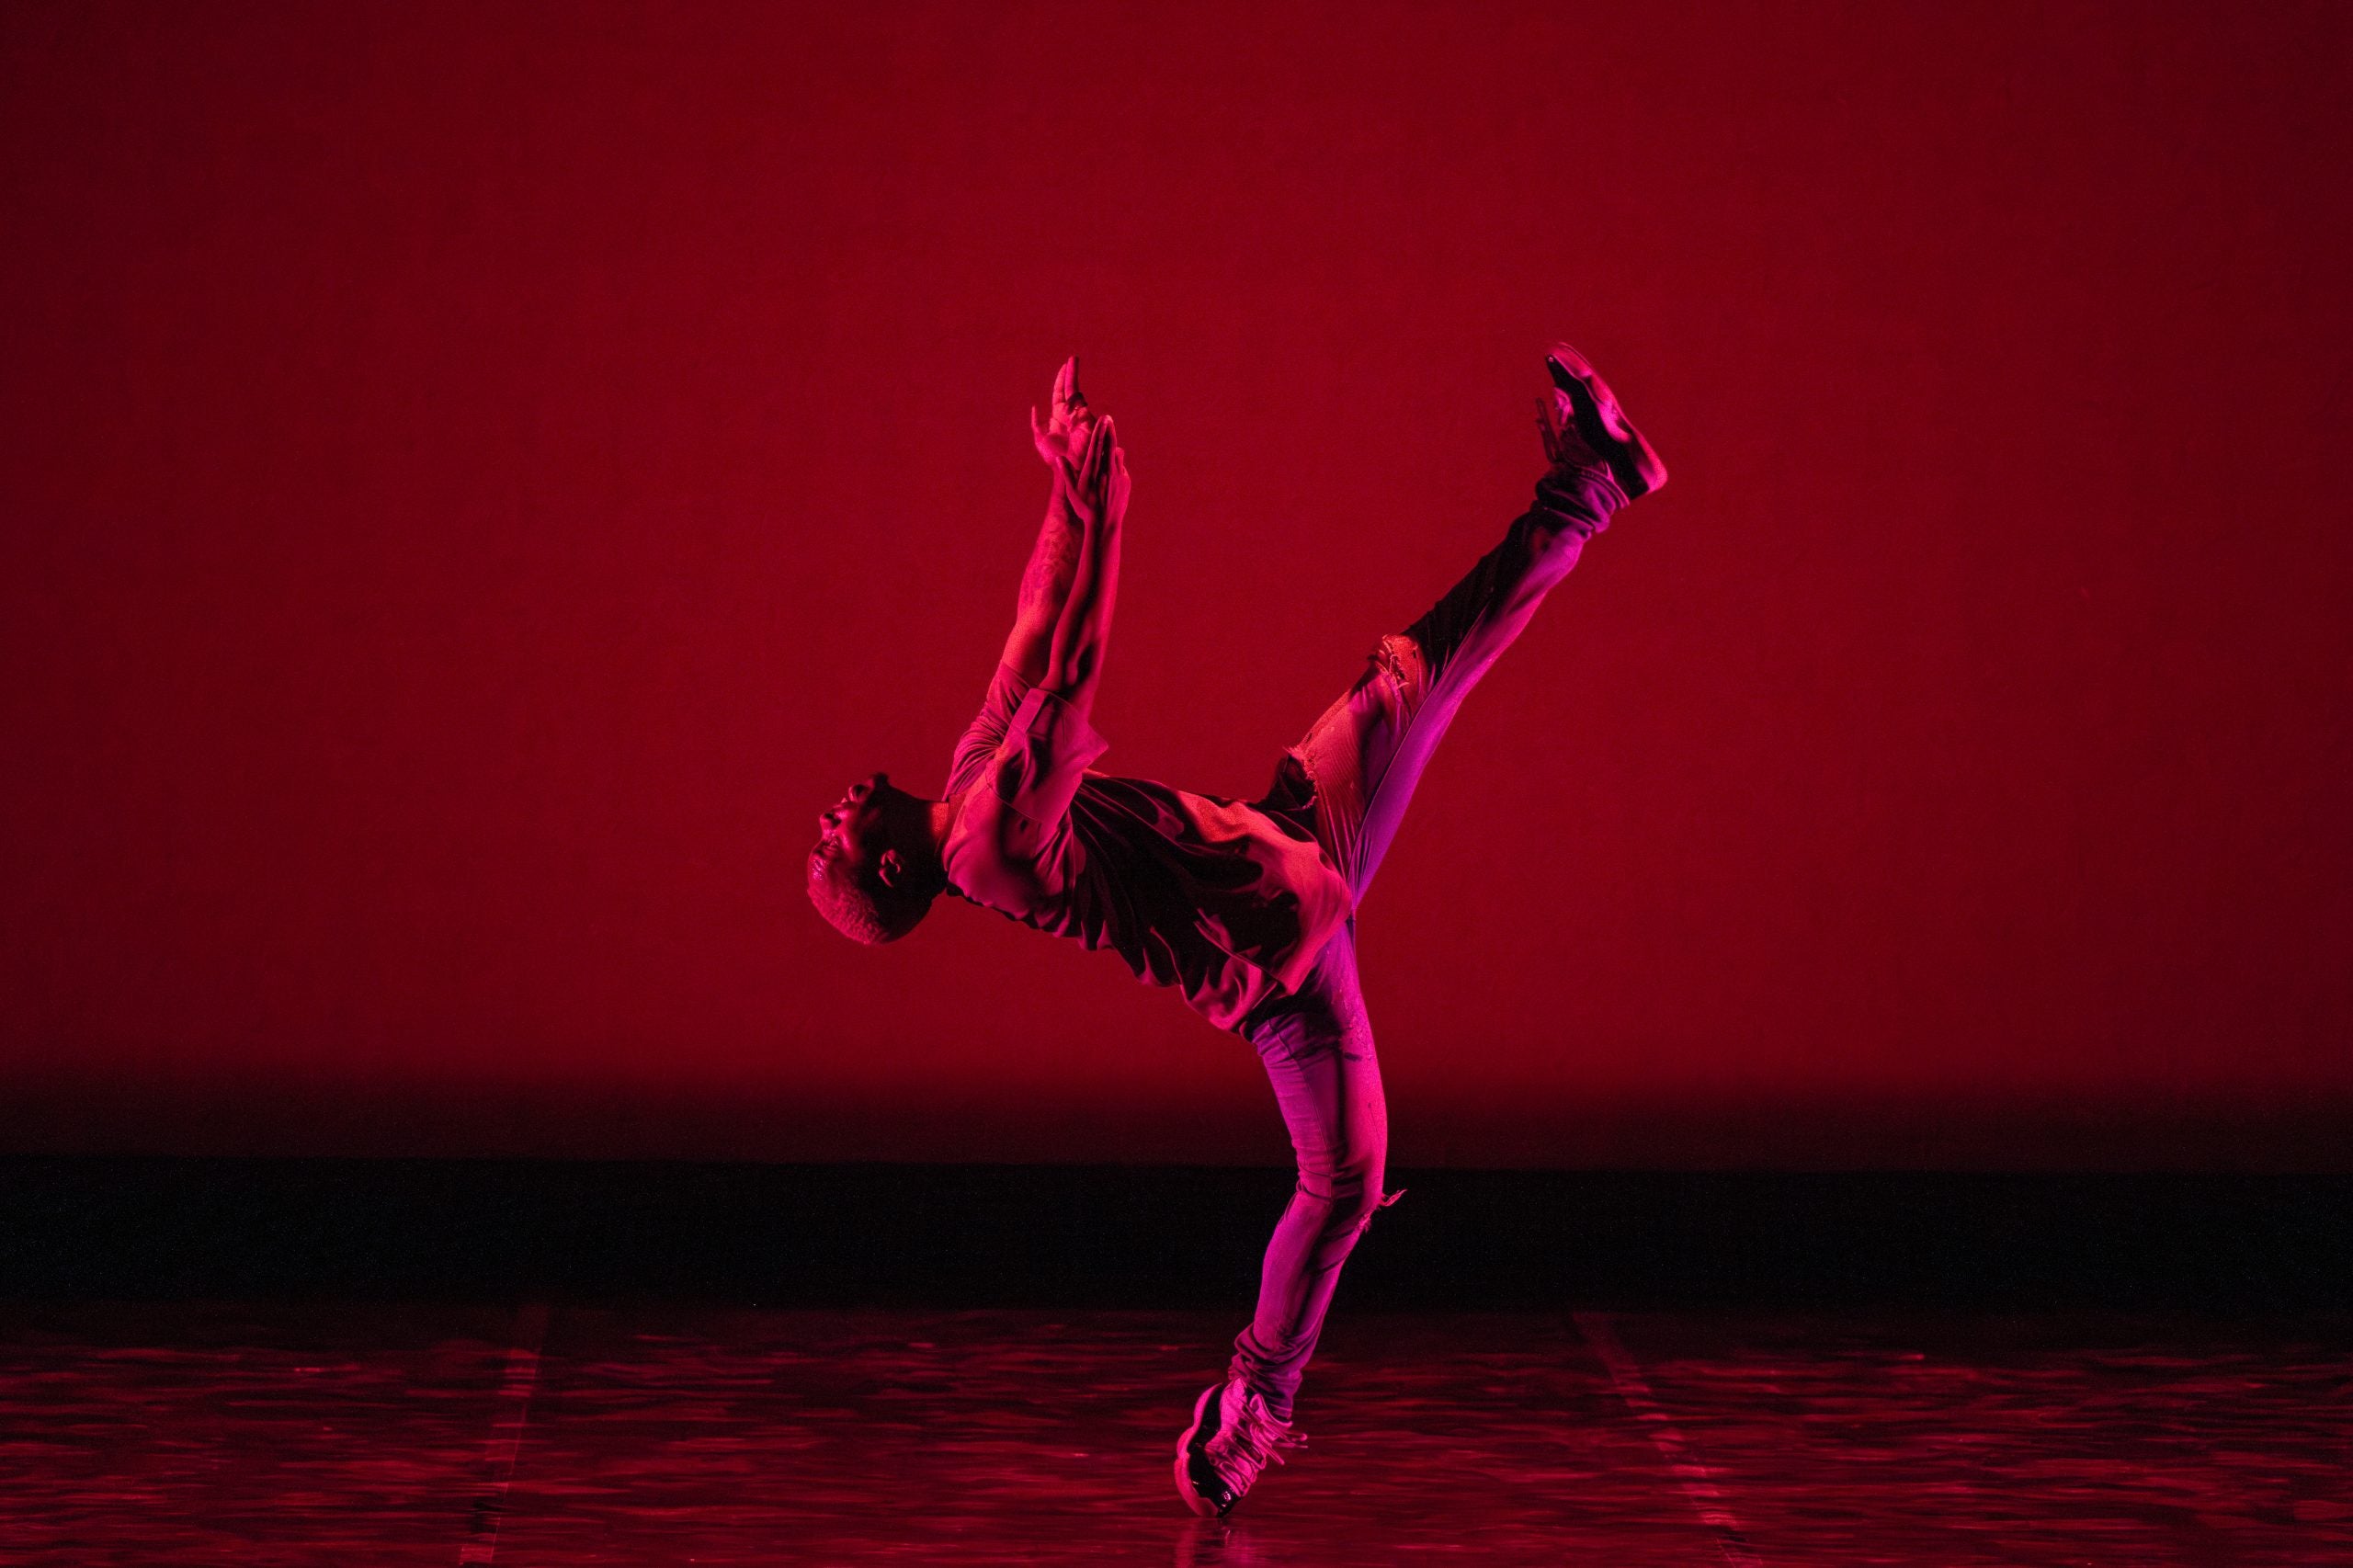 Did You Know There’s A Festival Dedicated Entirely To Black Dance? Here’s What You Missed